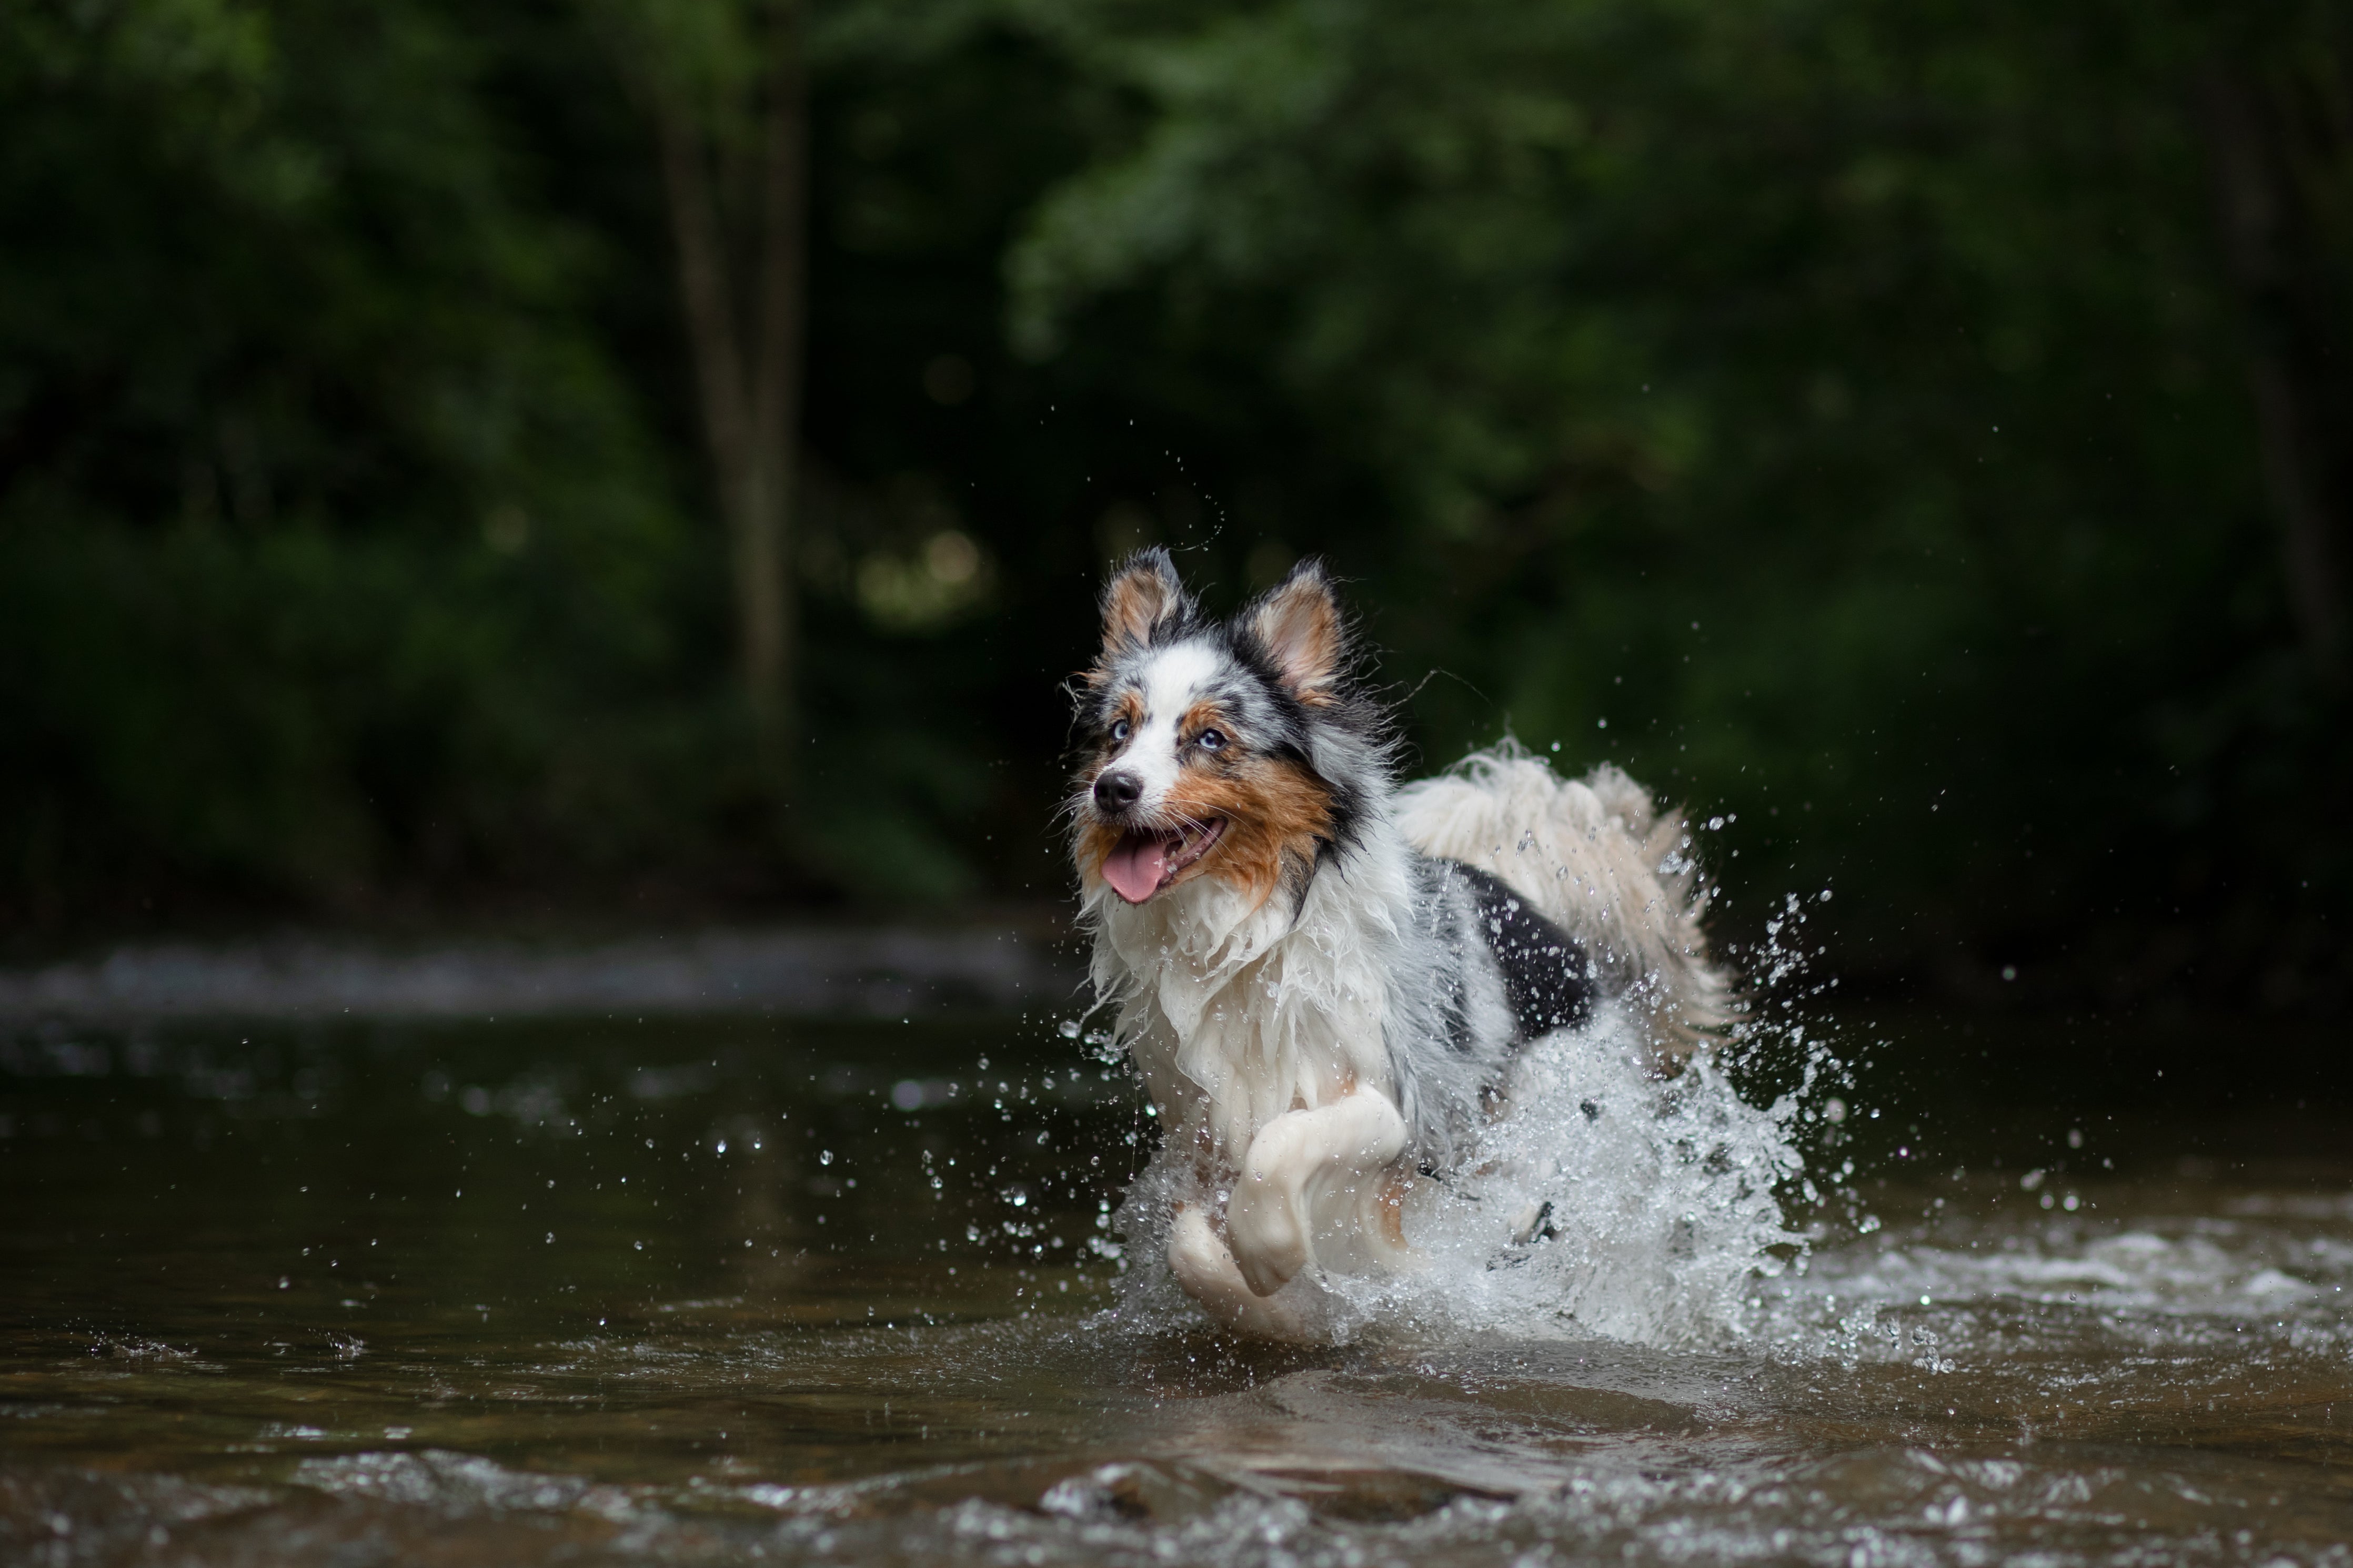 How to keep your dog safe in lakes and rivers